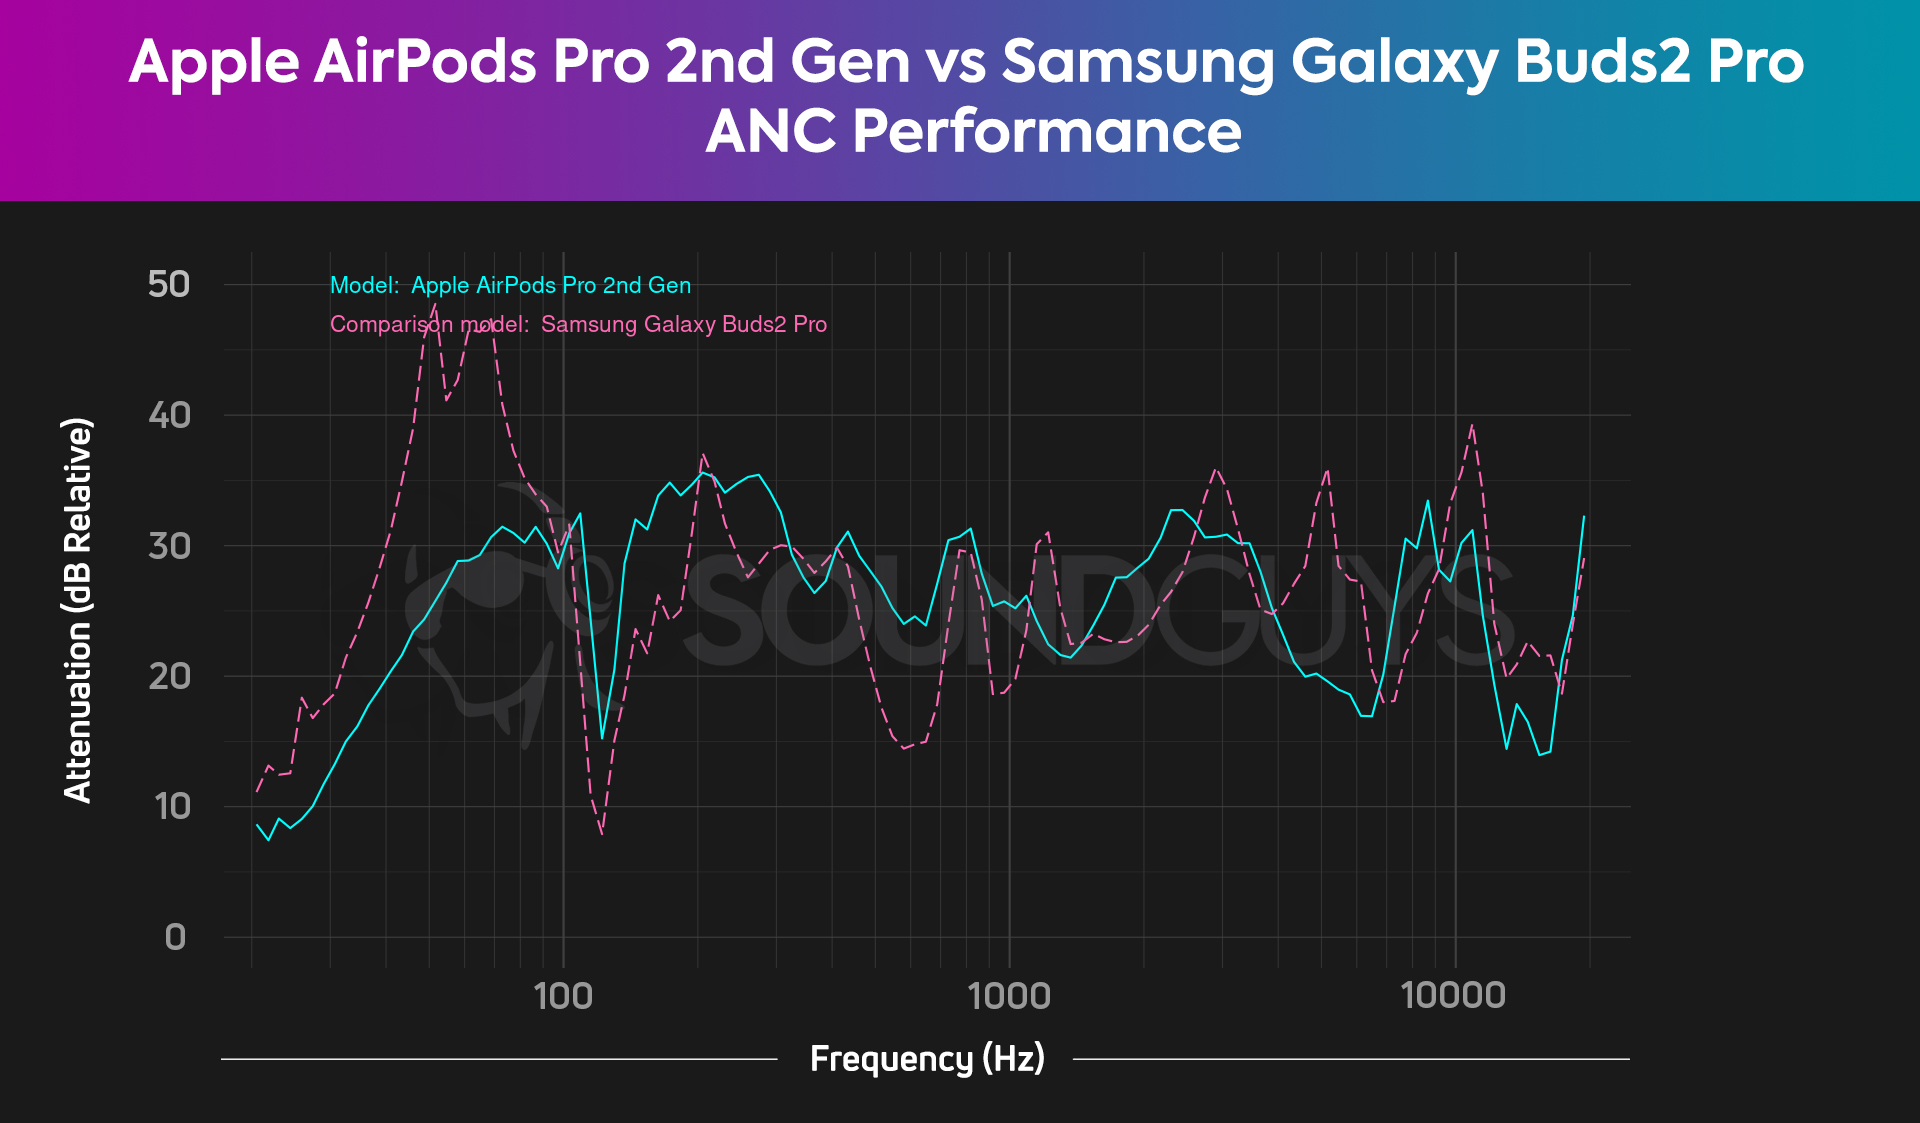 Both the Apple AirPods Pro 2nd Gen and the Samsung Galaxy Buds2 Pro offer excellent ANC.